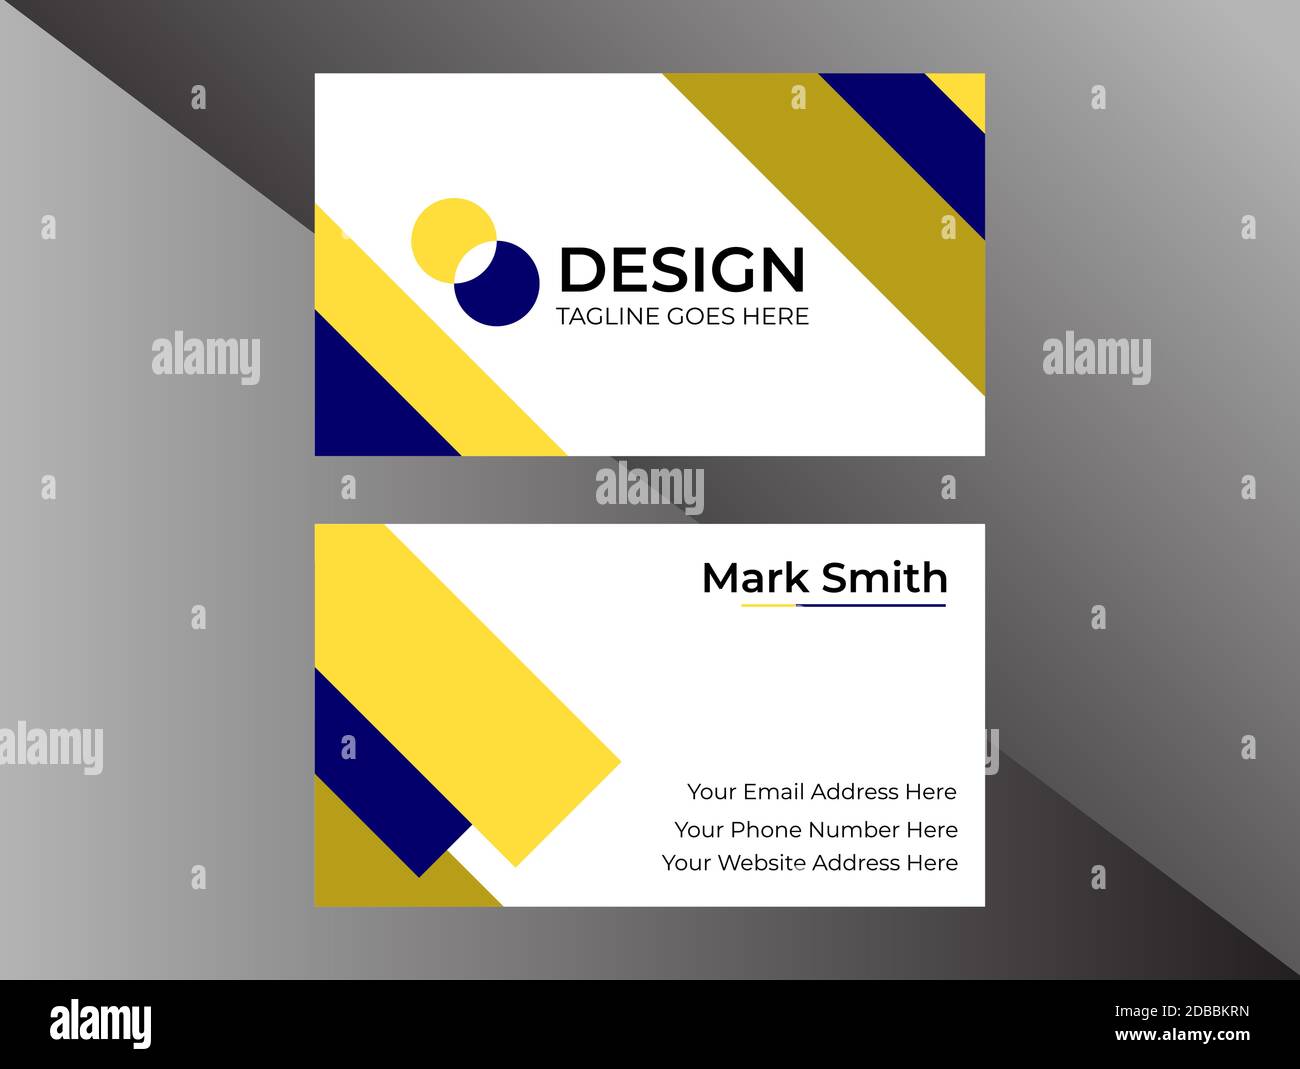 corporate-style-2-sided-business-card-design-with-elegant-shapes-and